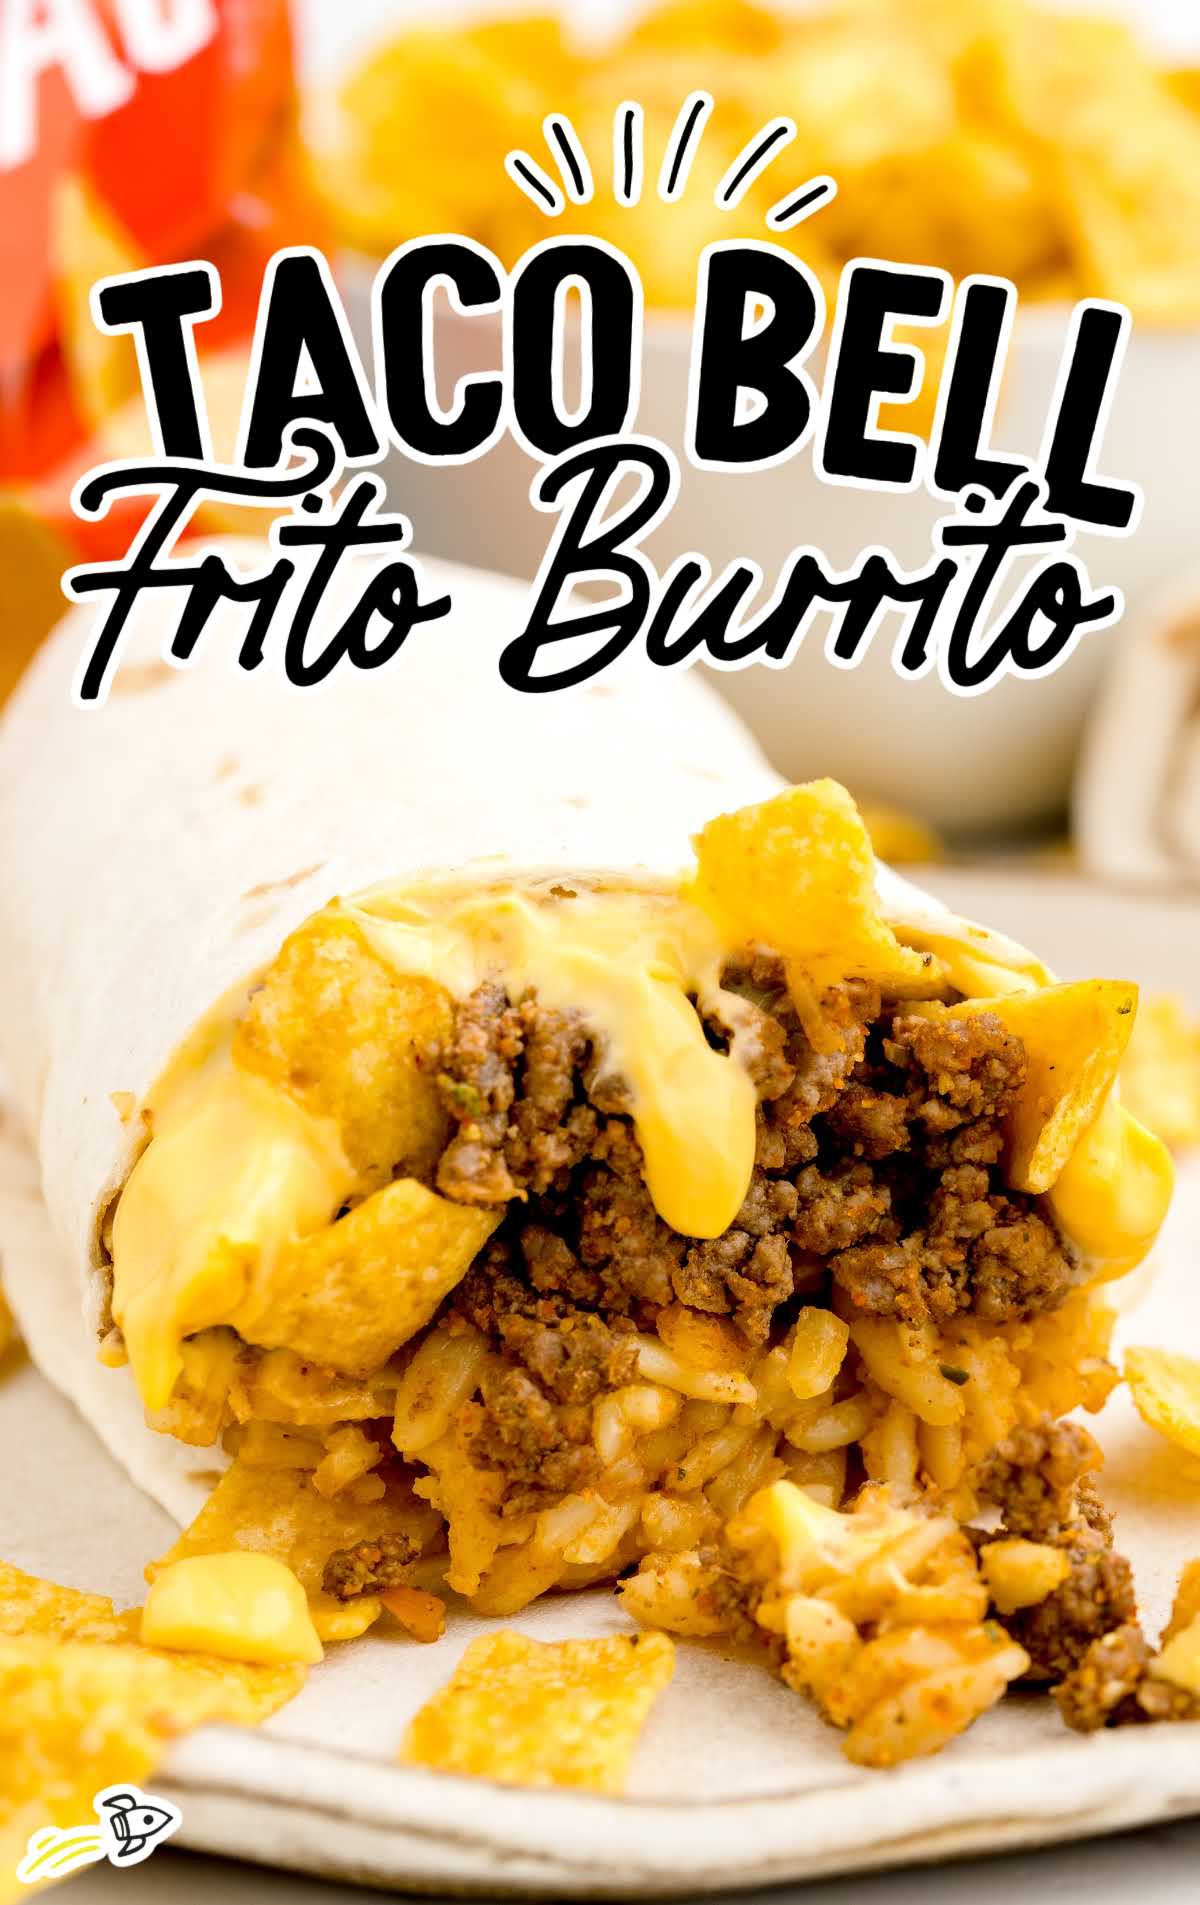 close up shot of a Taco Bell Frito Burrito on a plate